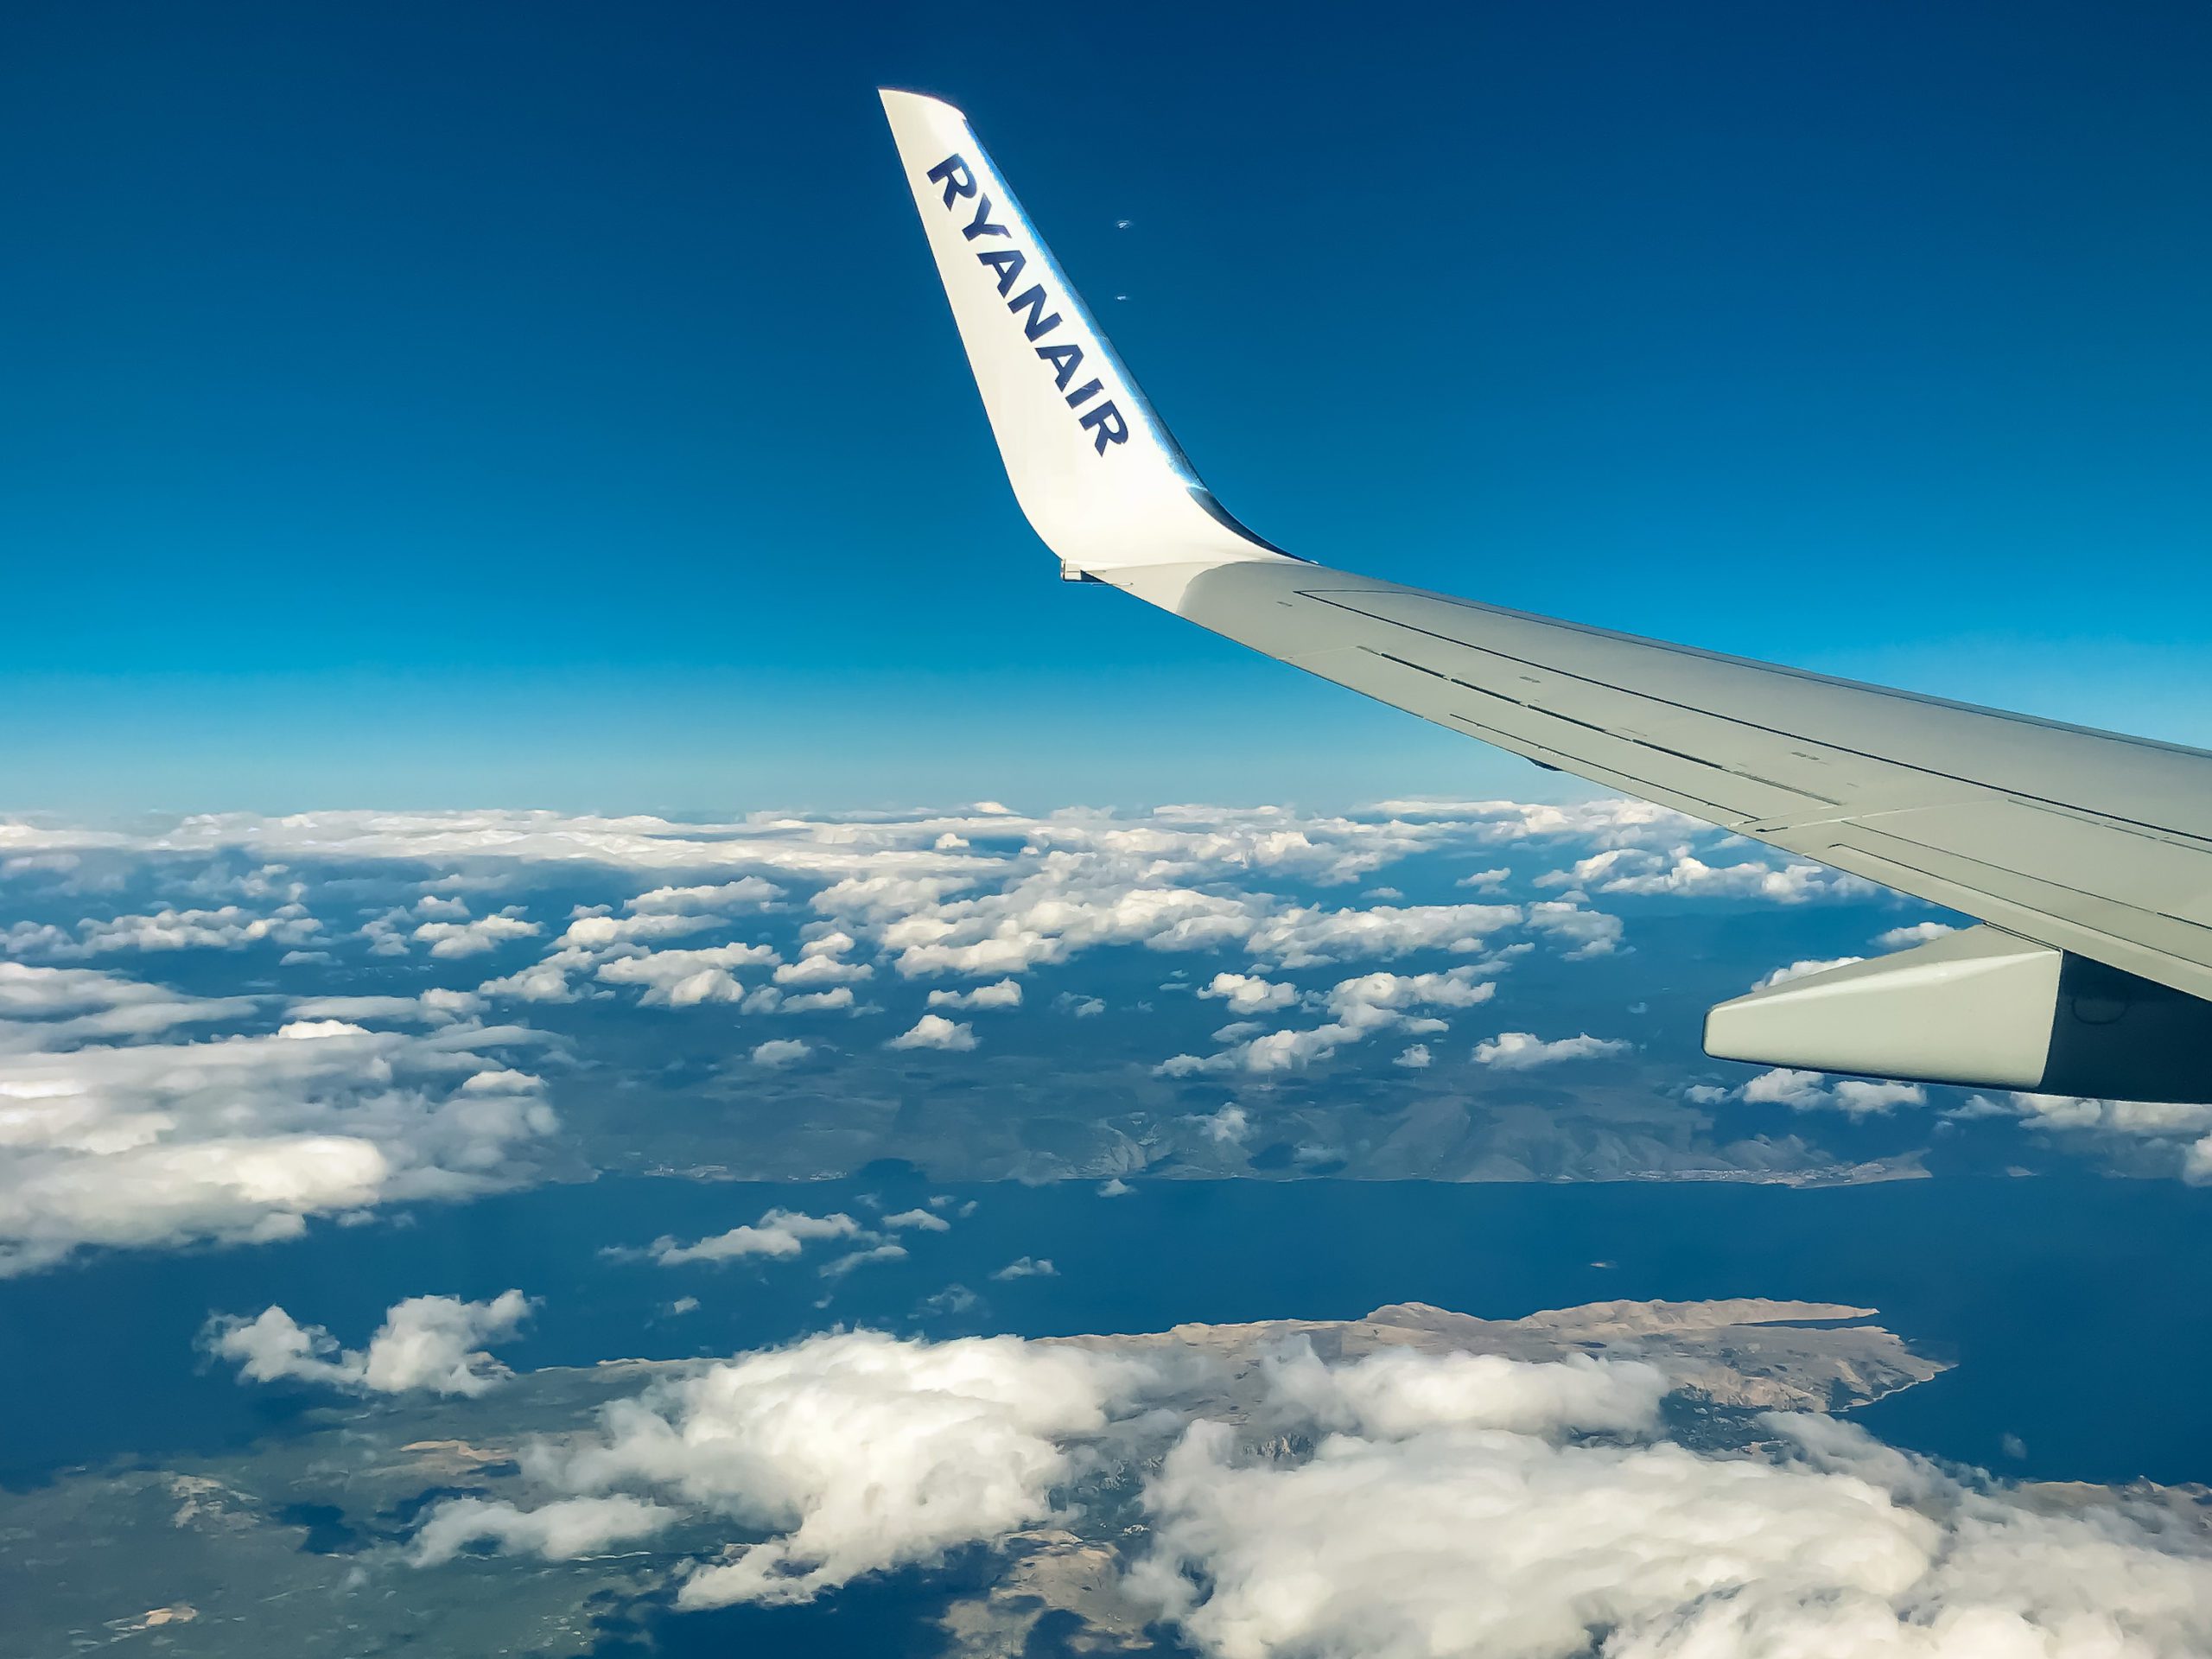 Ryanair plans to restore 40% of flights from July 1